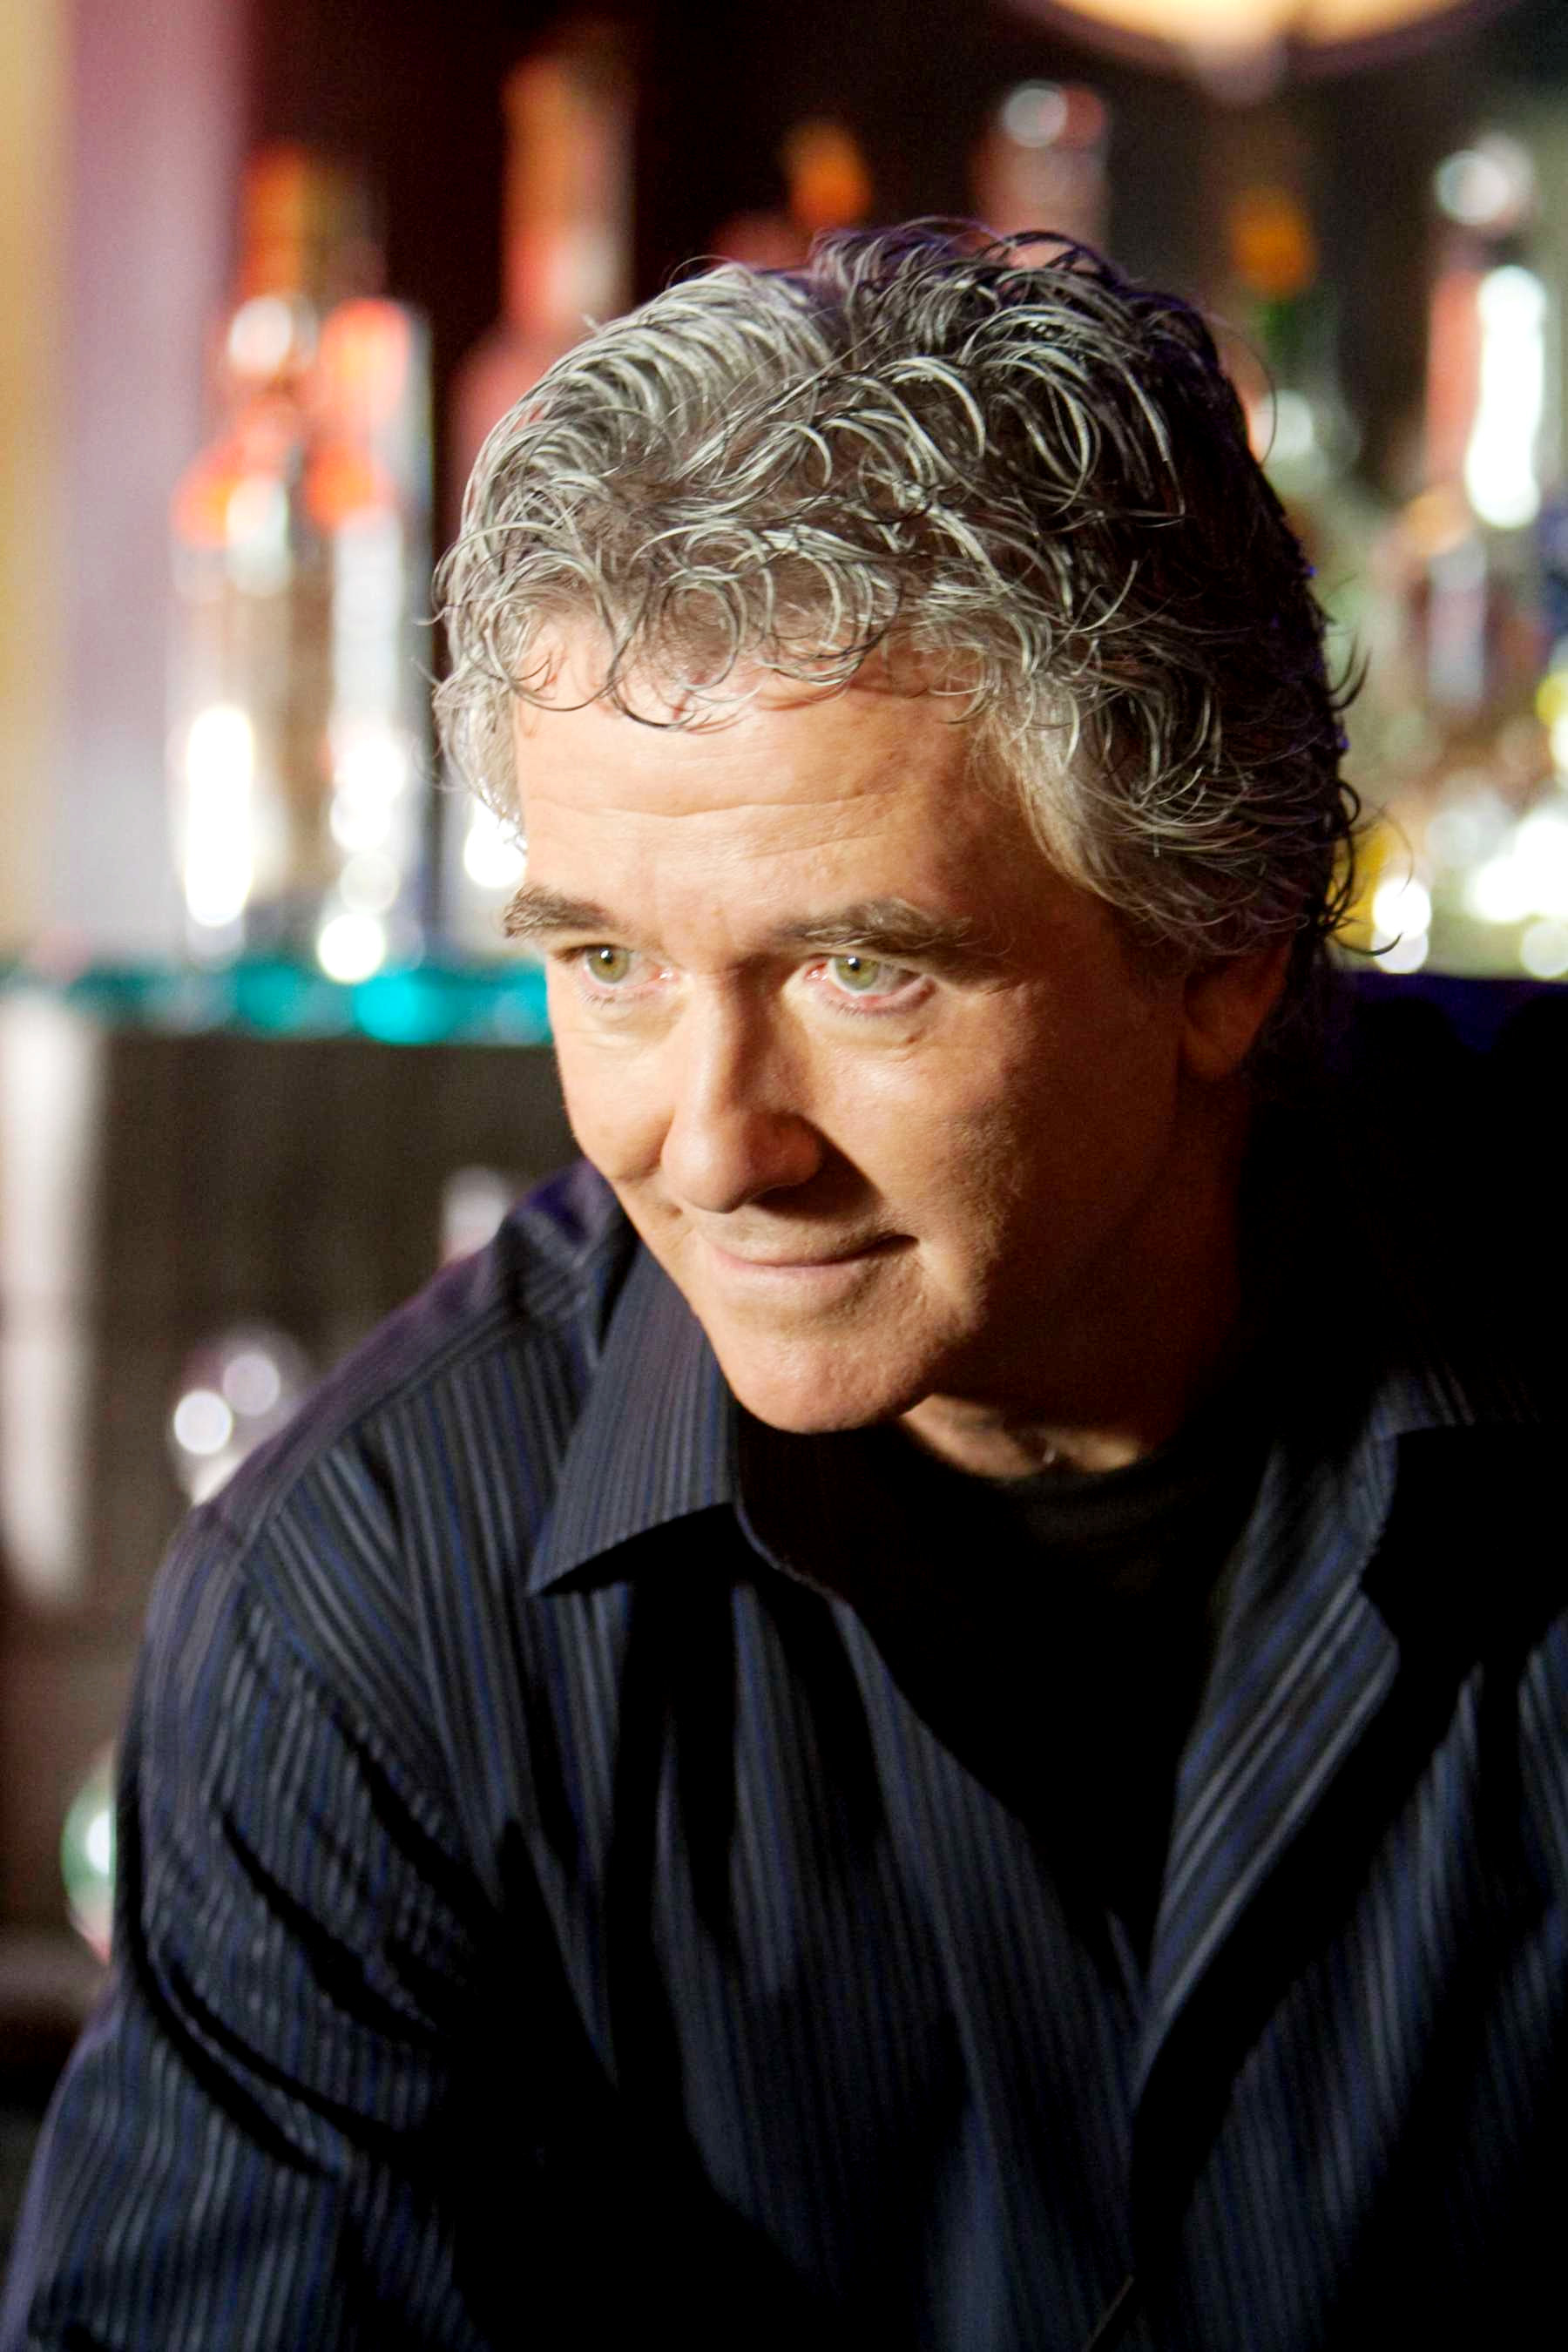 Patrick Duffy stars as Richie in Touchstone PicturesTouchstone's You Again (2010)